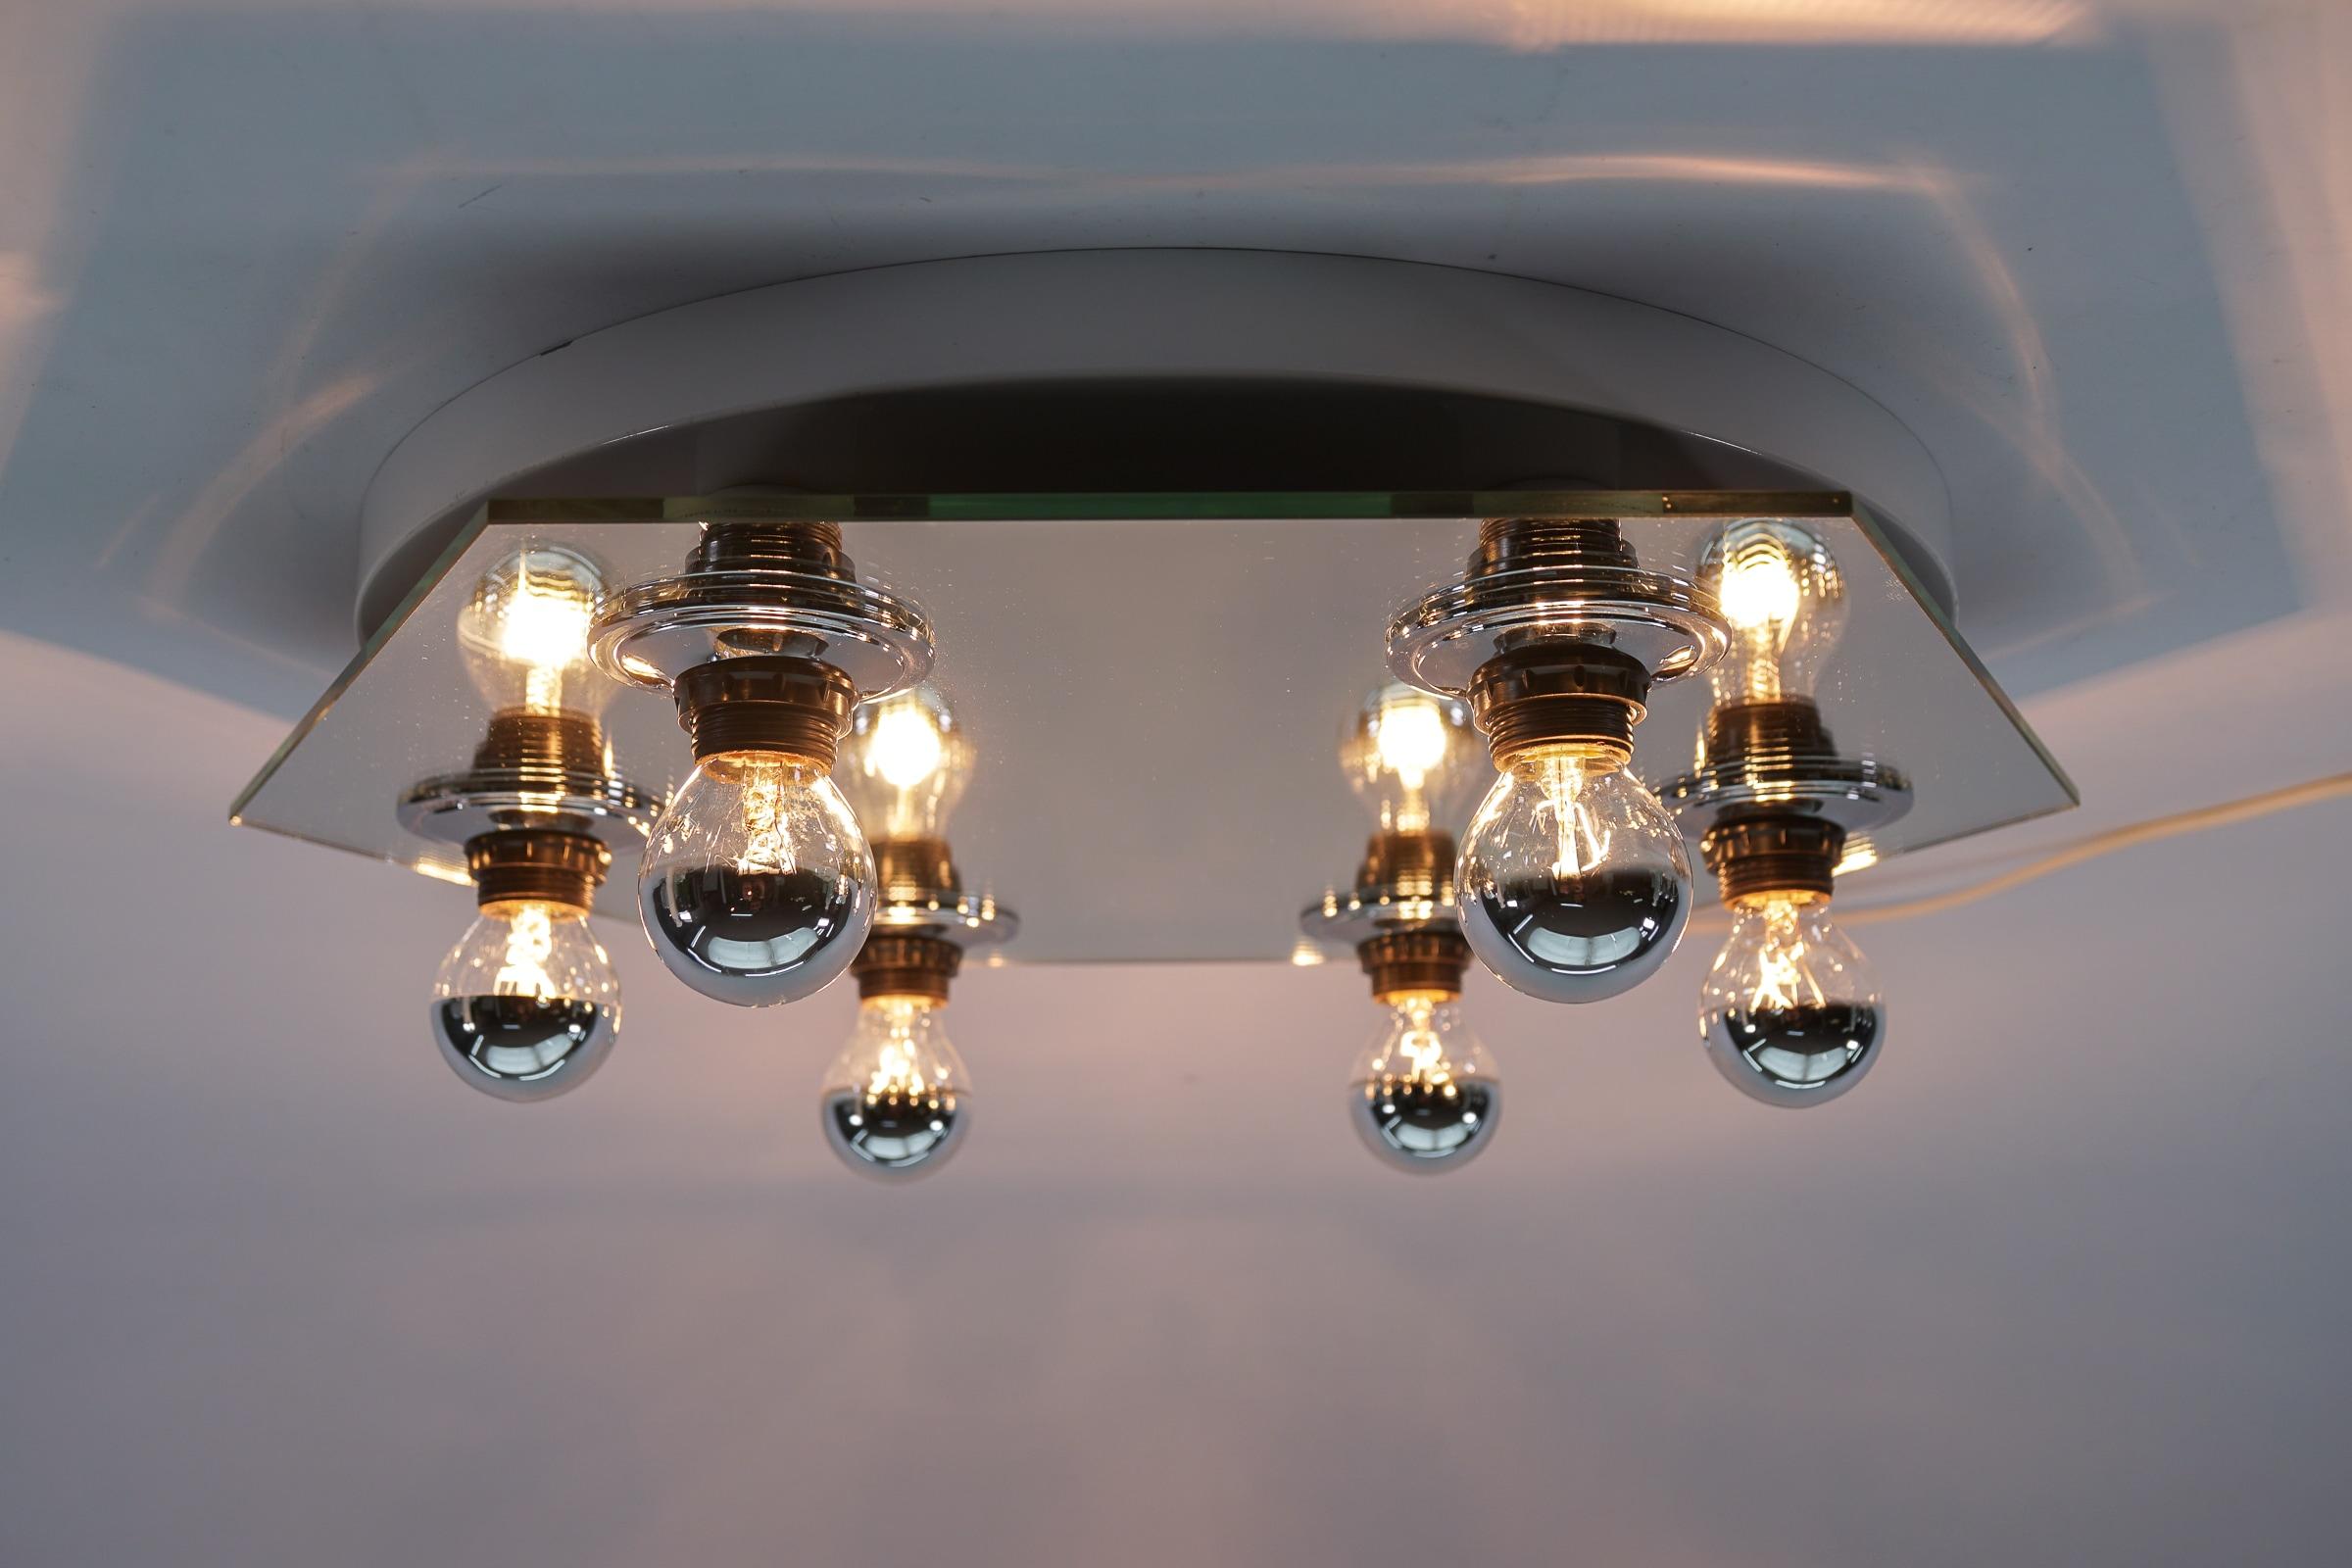 Hexagonal Mirrored Ceiling Lamp With Six Light Bulbs, 1970s Italy For Sale 2